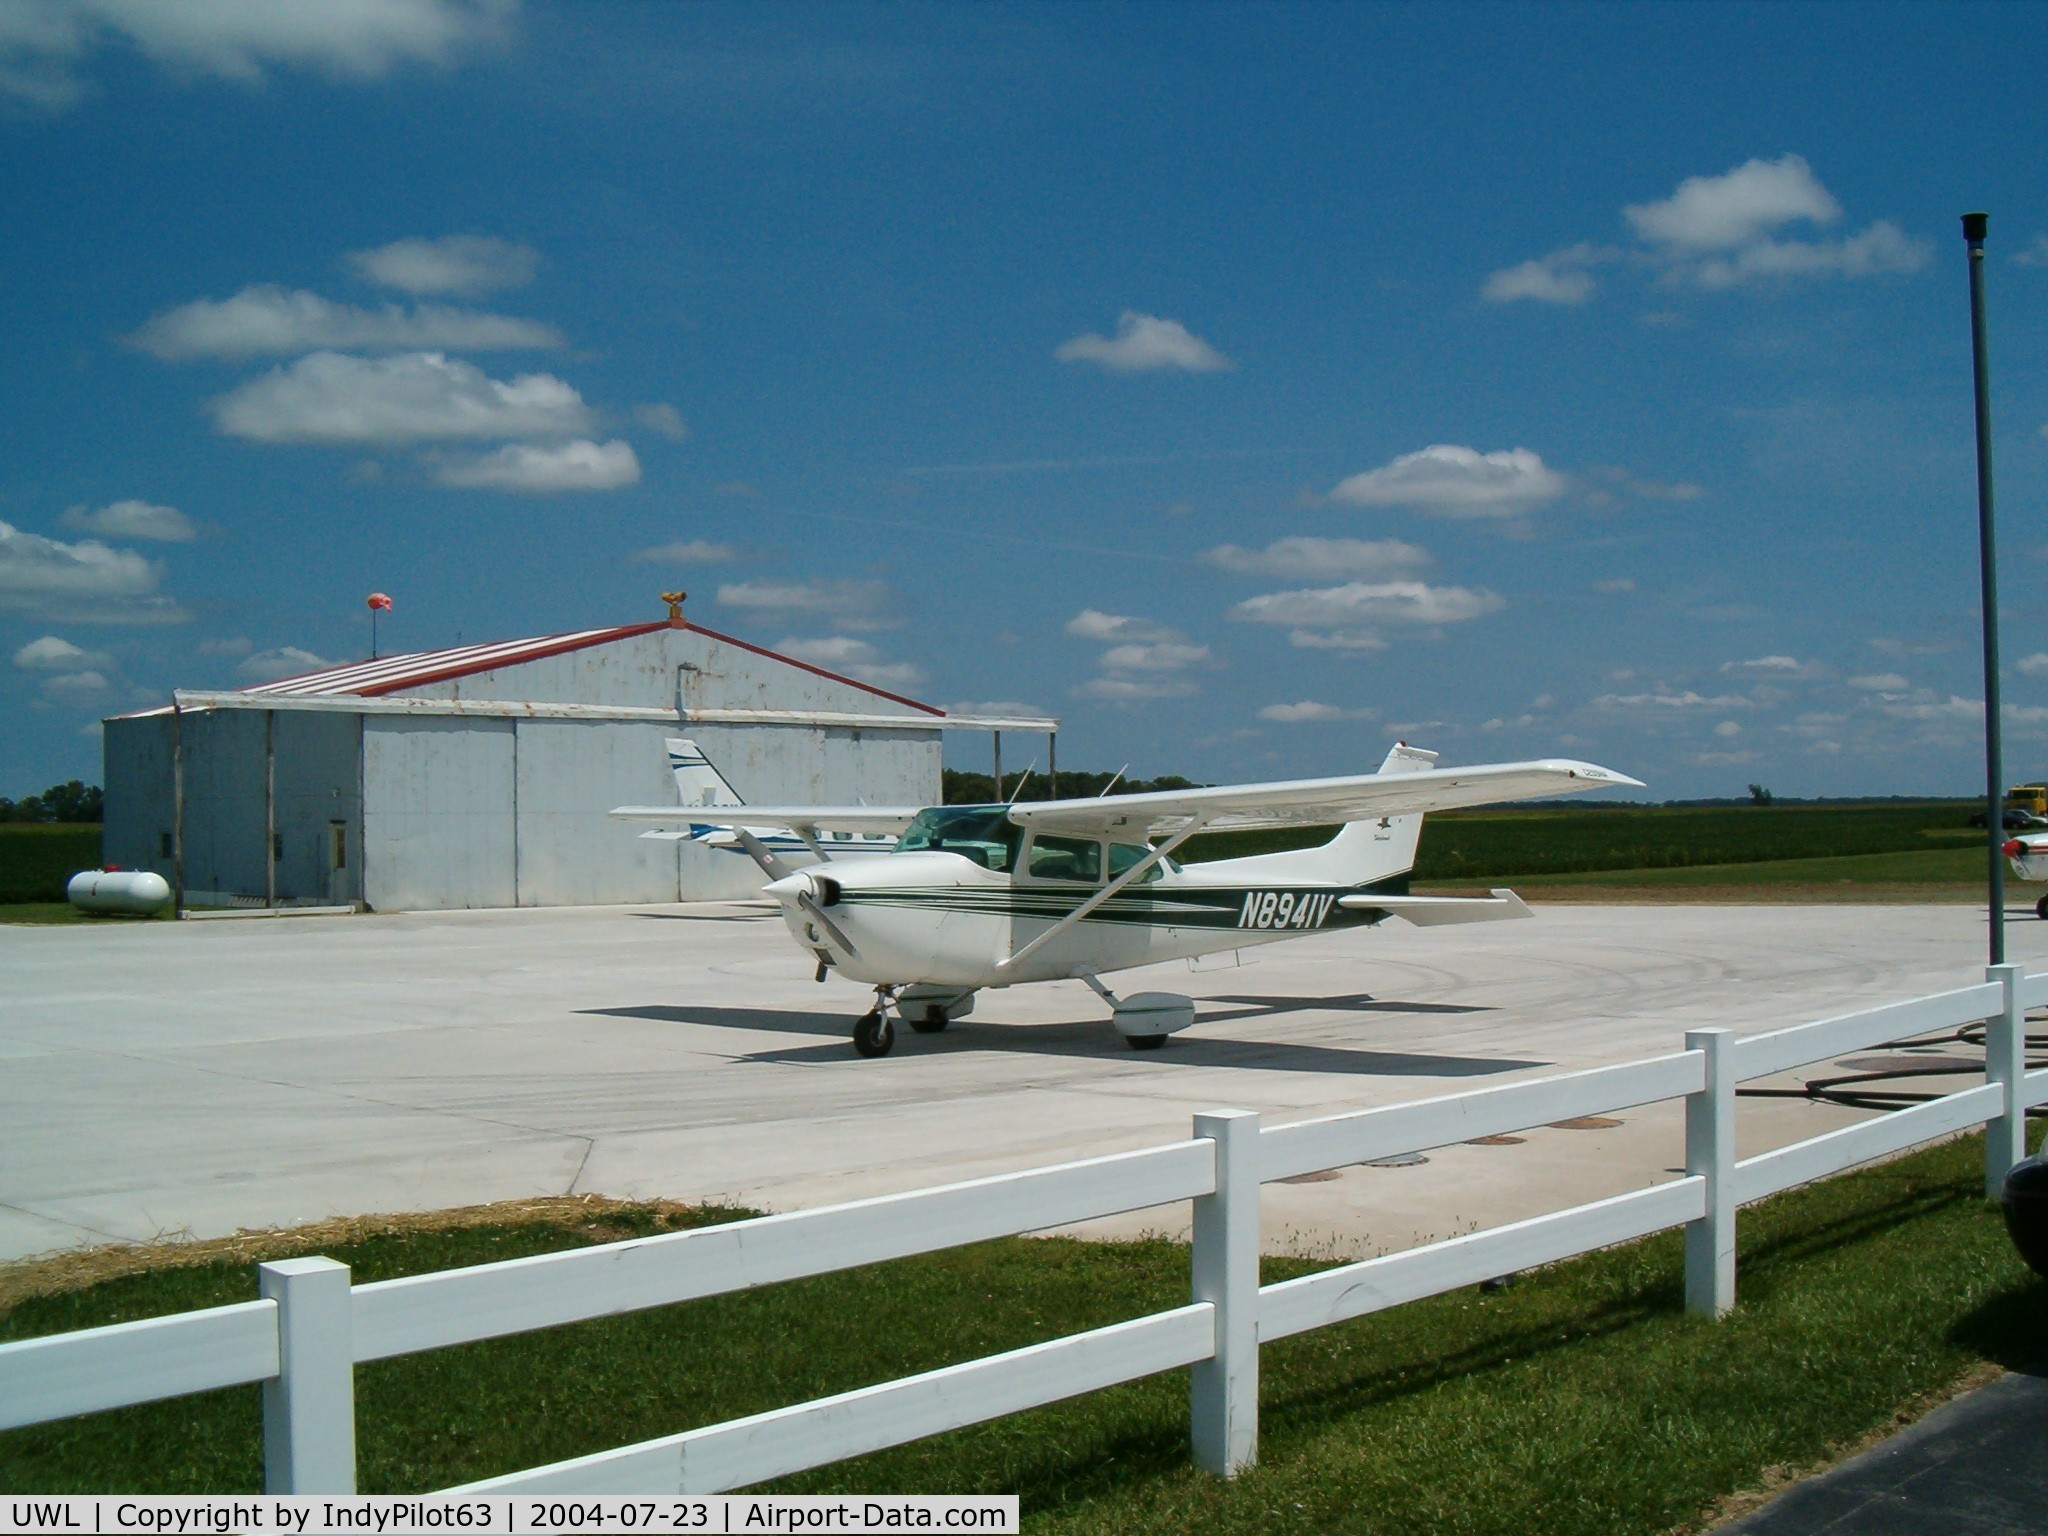 New Castle-henry Co Municipal Airport (UWL) - Tarmac, and N8941V, which I've flown in twice.